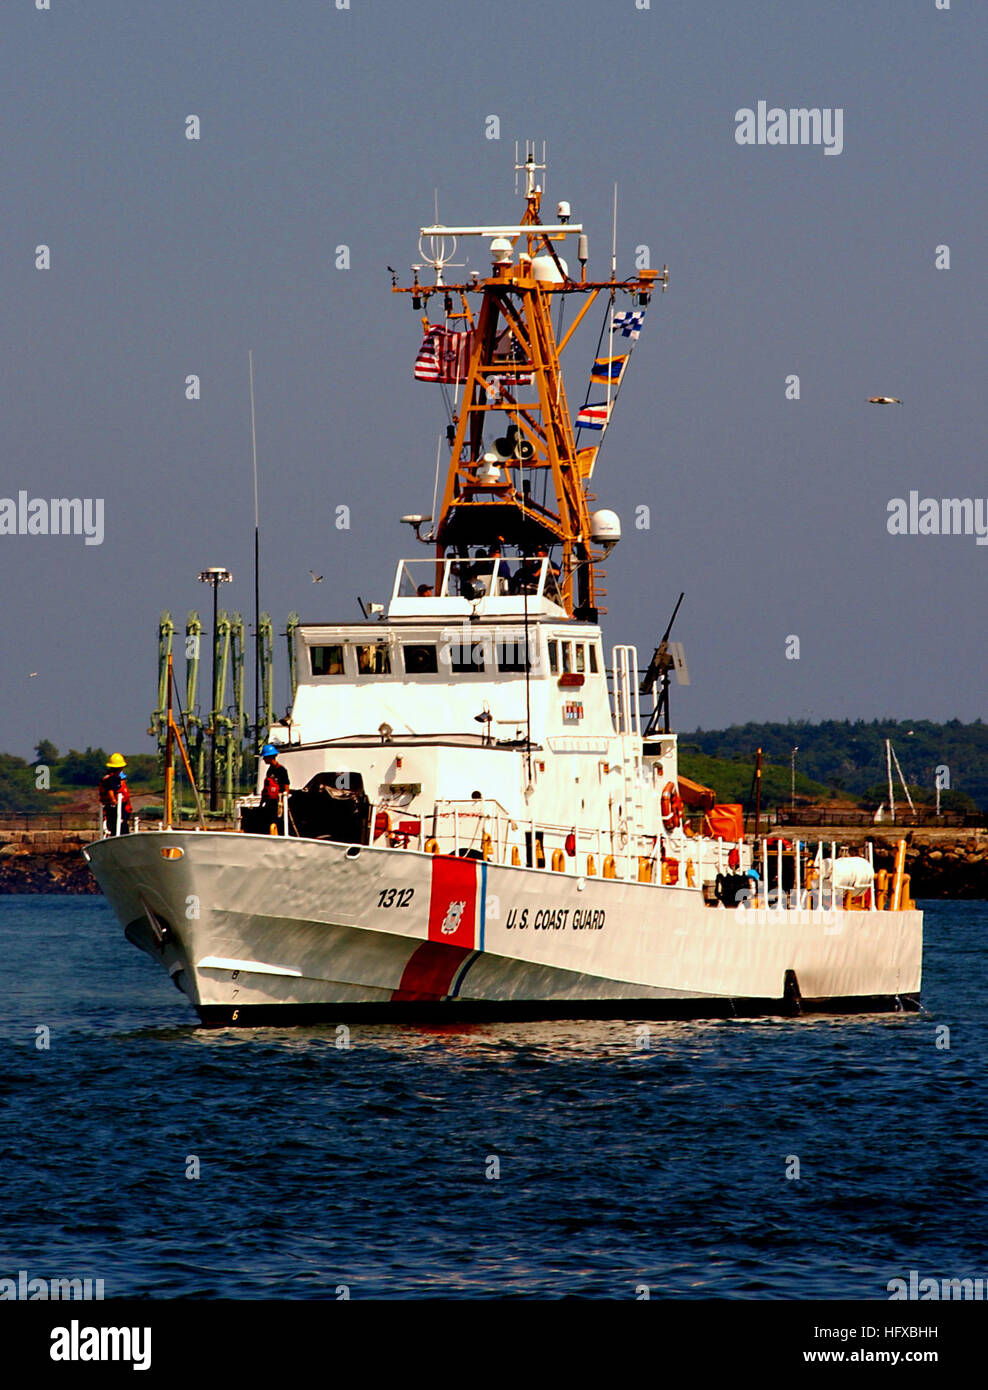 050804-C-2023P-569 Portland, Me. (Aug. 2, 2005) - The U.S. Coast Guard cutter USCGC Sanibel (WPB 1312), a 110-foot Island-class Patrol Boat from Woods Hole, Mass., patrols the Portland Harbor as part of security measures for Secretary of Homeland Security Michael Chertoff's visit. Chertoff was at the Casco Bay Lines Ferry Terminal to address waterway security in and around Portland. U.S. Coast Guard photo by Public Affairs Specialist 3rd Class Luke Pinneo (RELEASED) US Navy 050804-C-2023P-569 Patrol Boat from Woods Hole, Mass., patrols the Portland Harbor as part of security measures for Secre Stock Photo